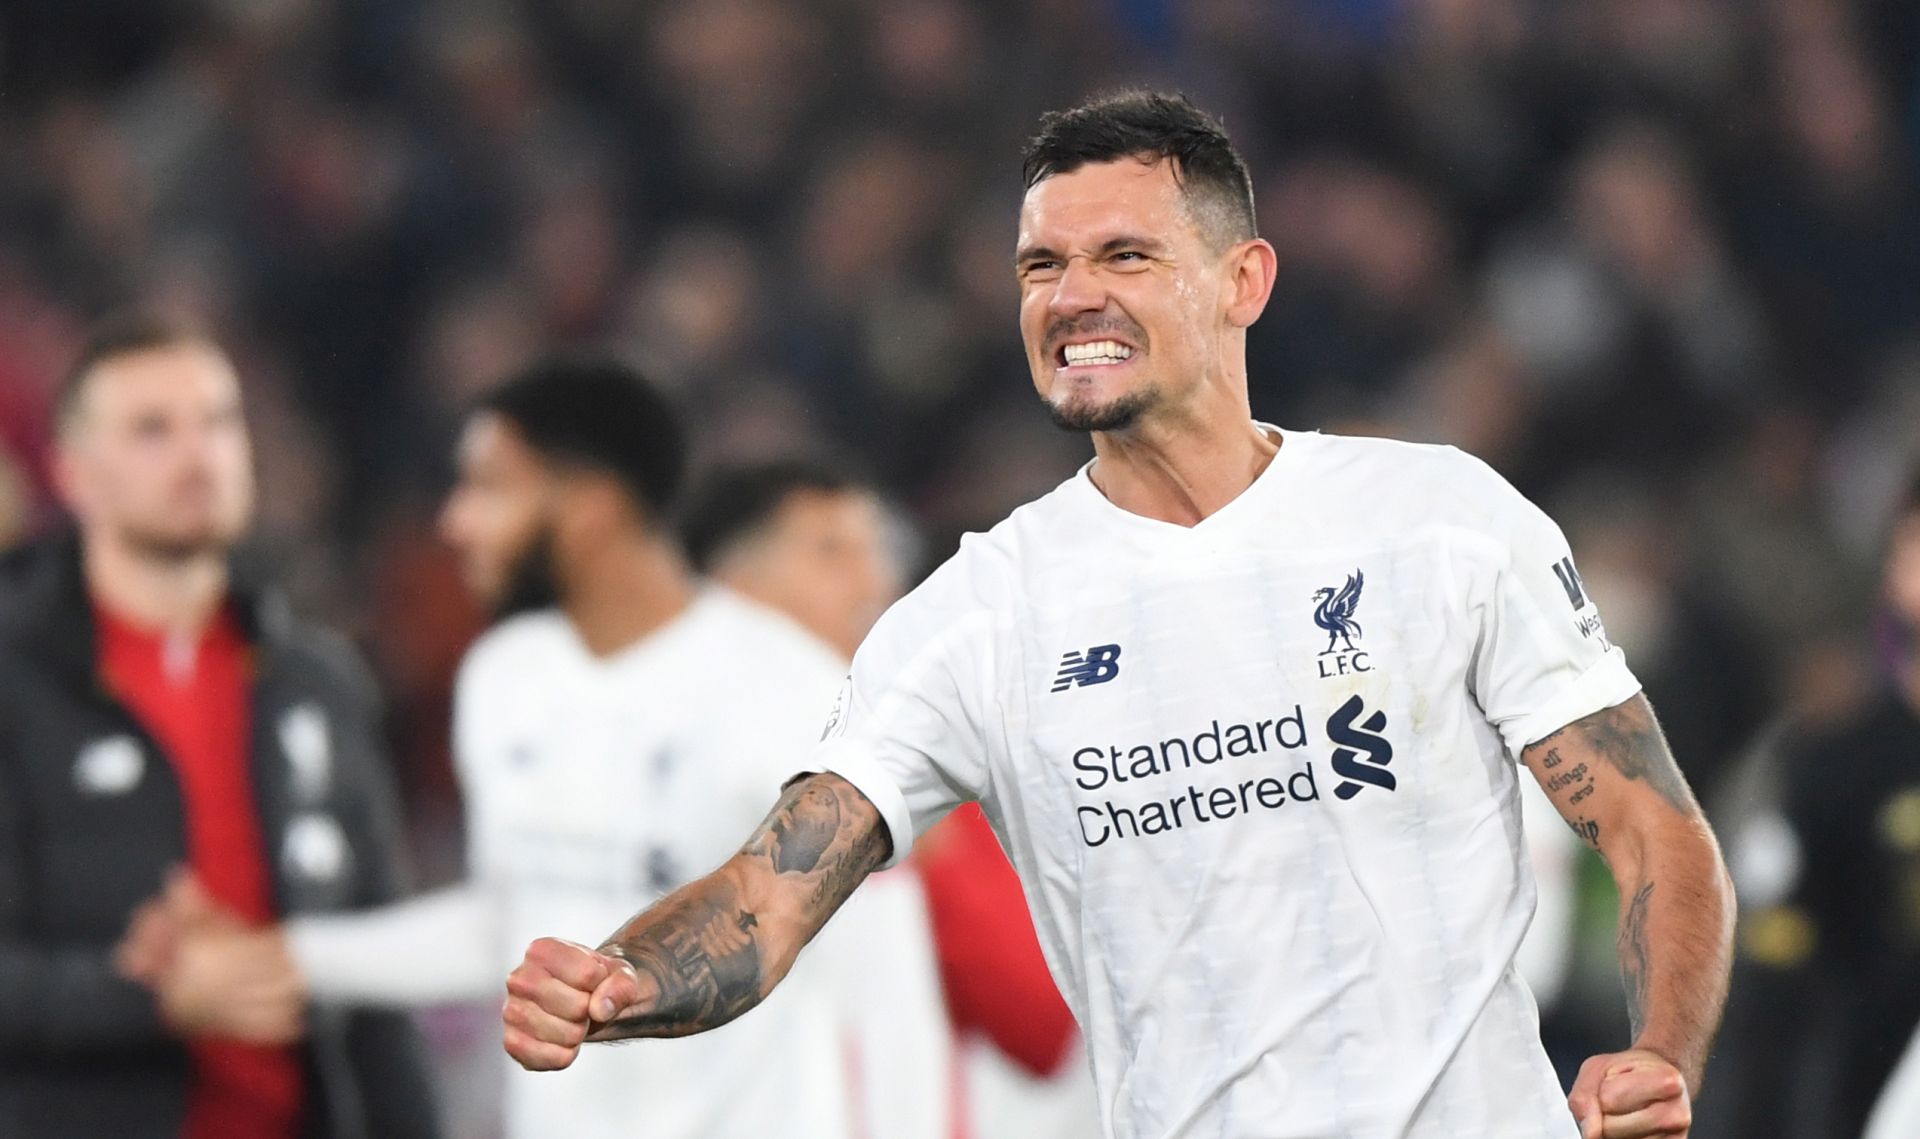 epa08020085 Liverpool's Dejan Lovren greets supporters at the end of the English Premier League soccer match between Crystal Palace v Liverpool at Selhurst Park in London, Britain, 23 November 2019.  EPA/FACUNDO ARRIZABALAGA EDITORIAL USE ONLY. No use with unauthorized audio, video, data, fixture lists, club/league logos or 'live' services. Online in-match use limited to 120 images, no video emulation. No use in betting, games or single club/league/player publications